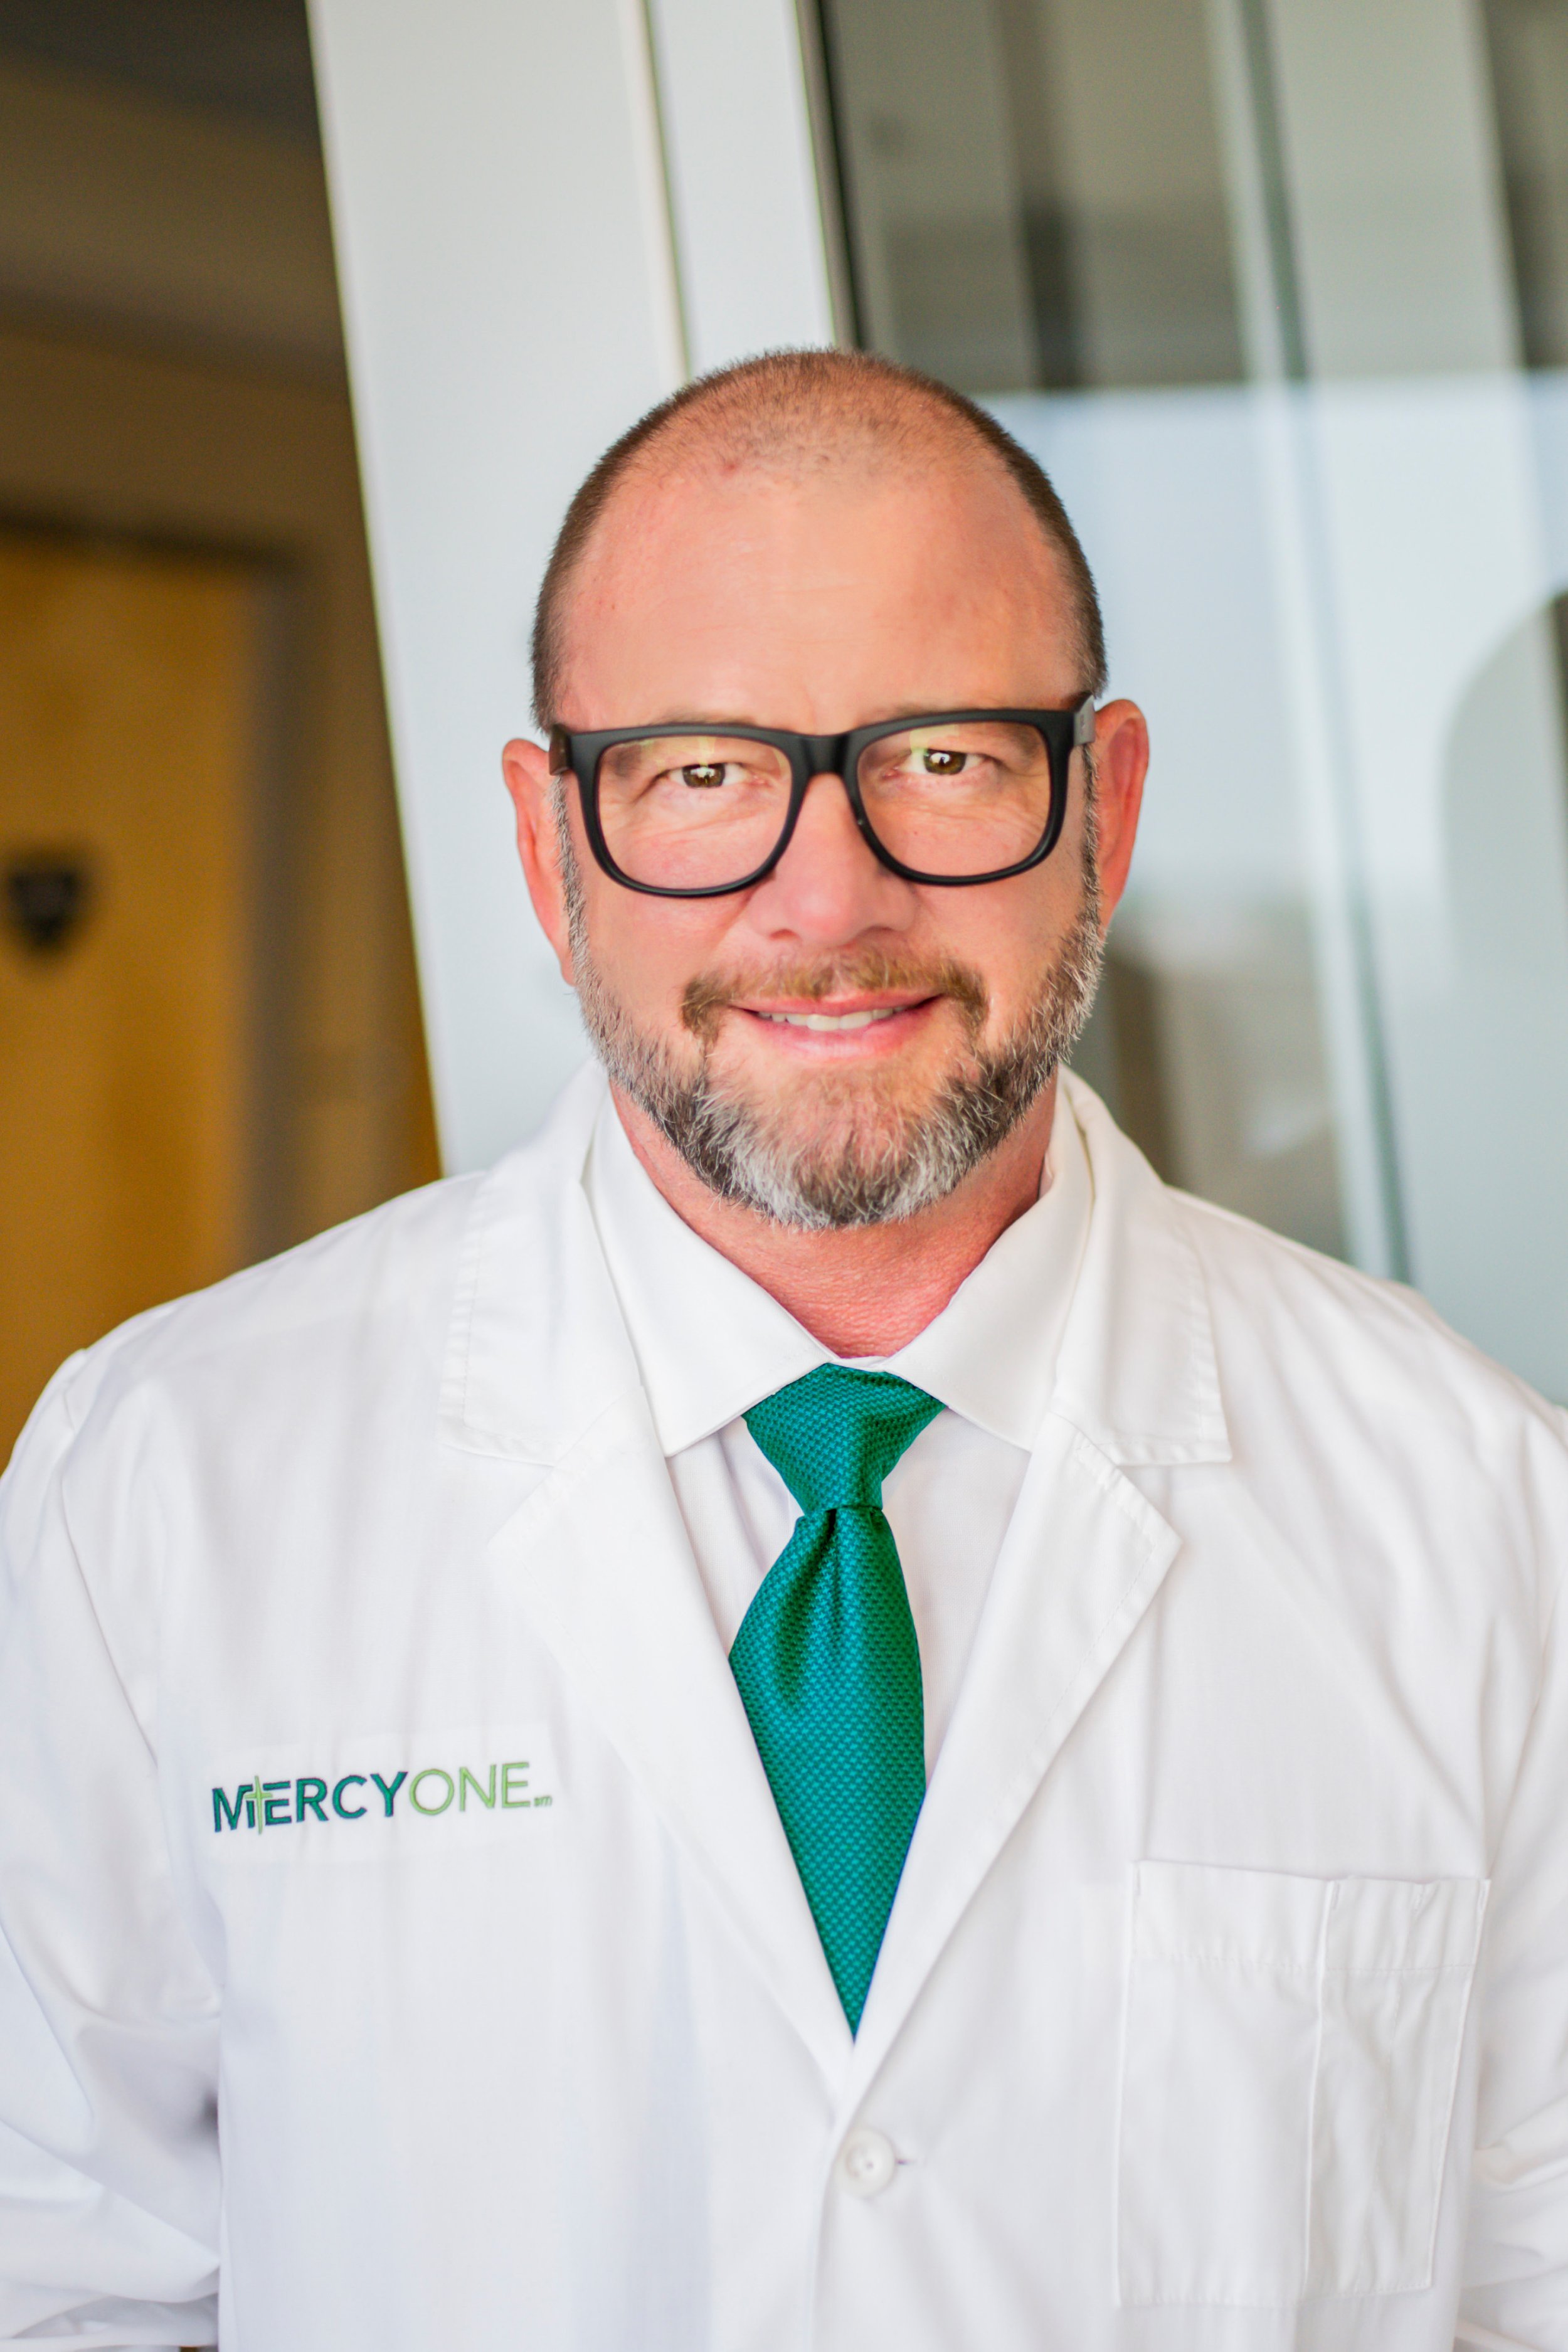 Patrick Kenney, DO, is named medical director of robotic surgery at MercyOne Siouxland Medical Center.